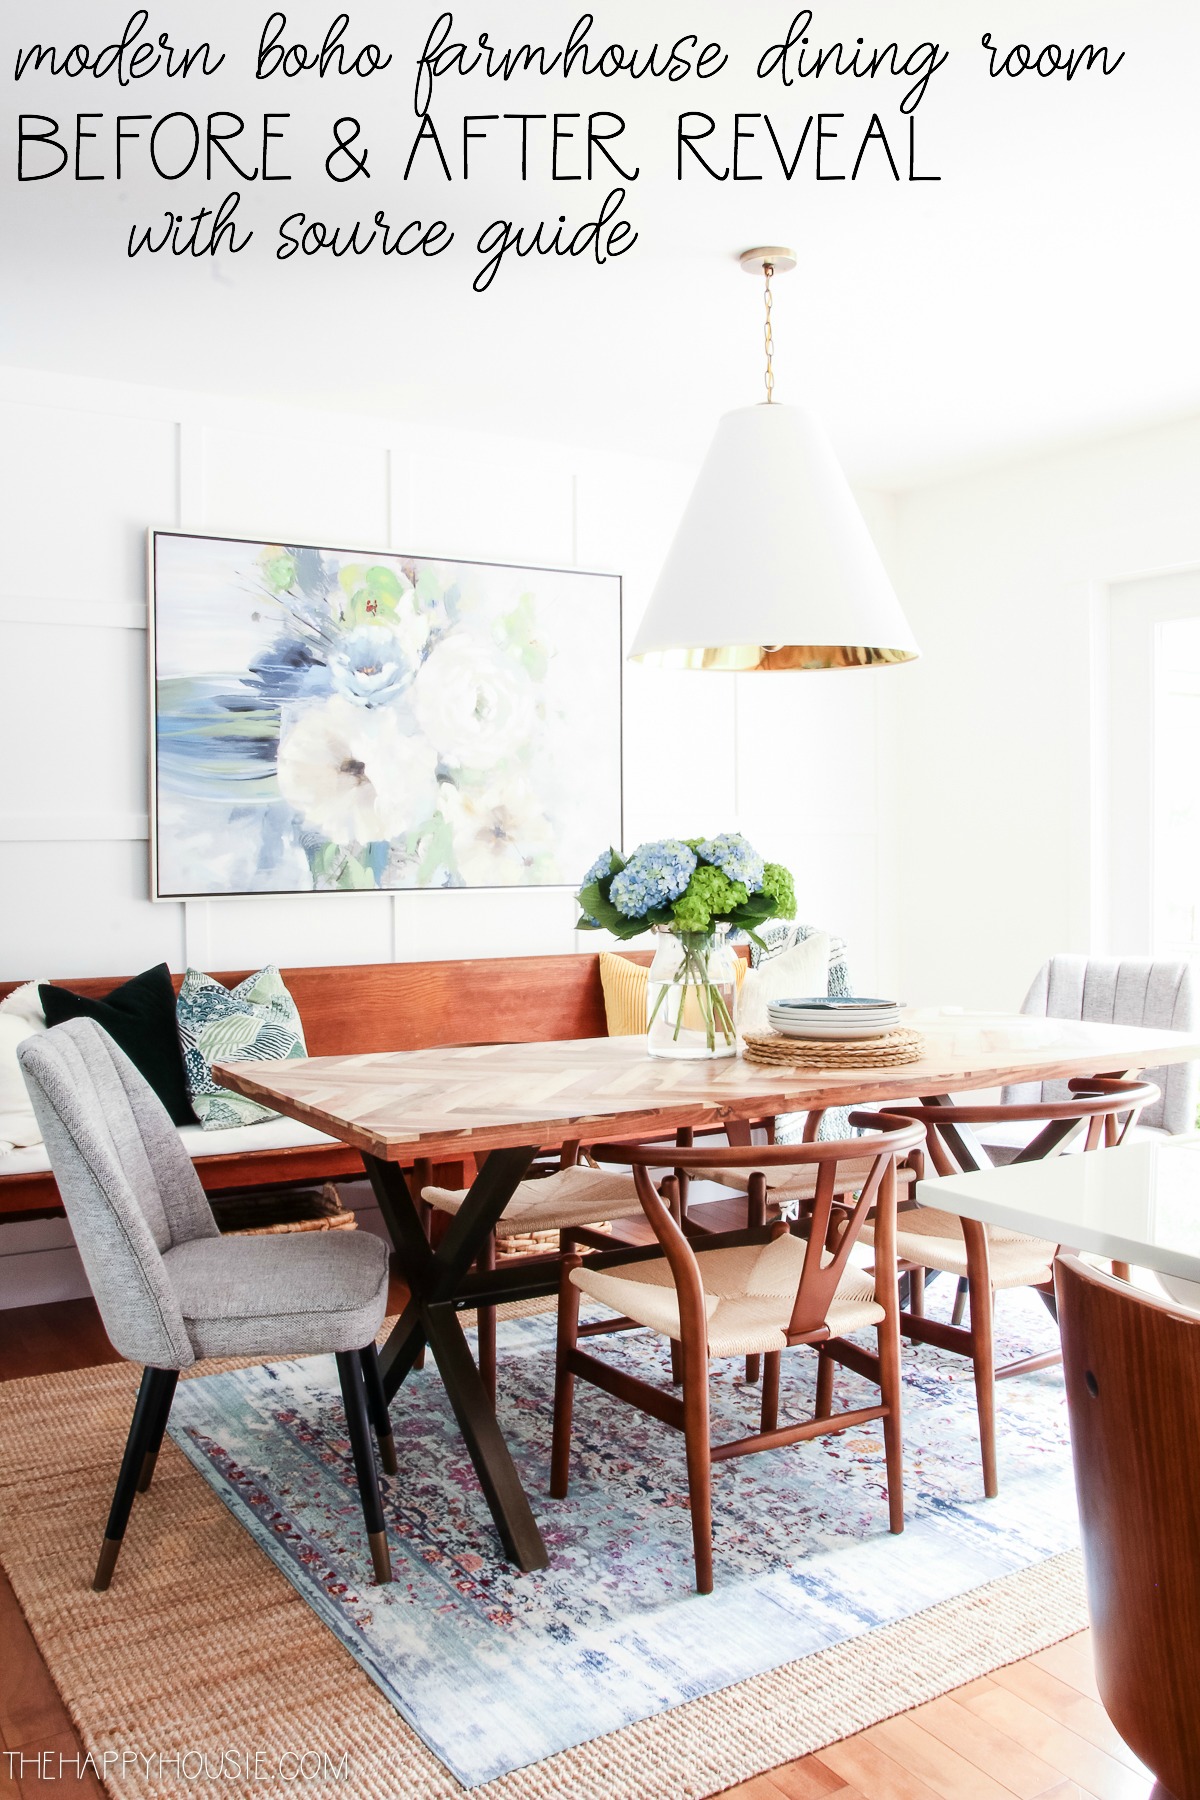 Modern Boho Farmhouse Dining Room Before & After Reveal With Source Guide graphic.